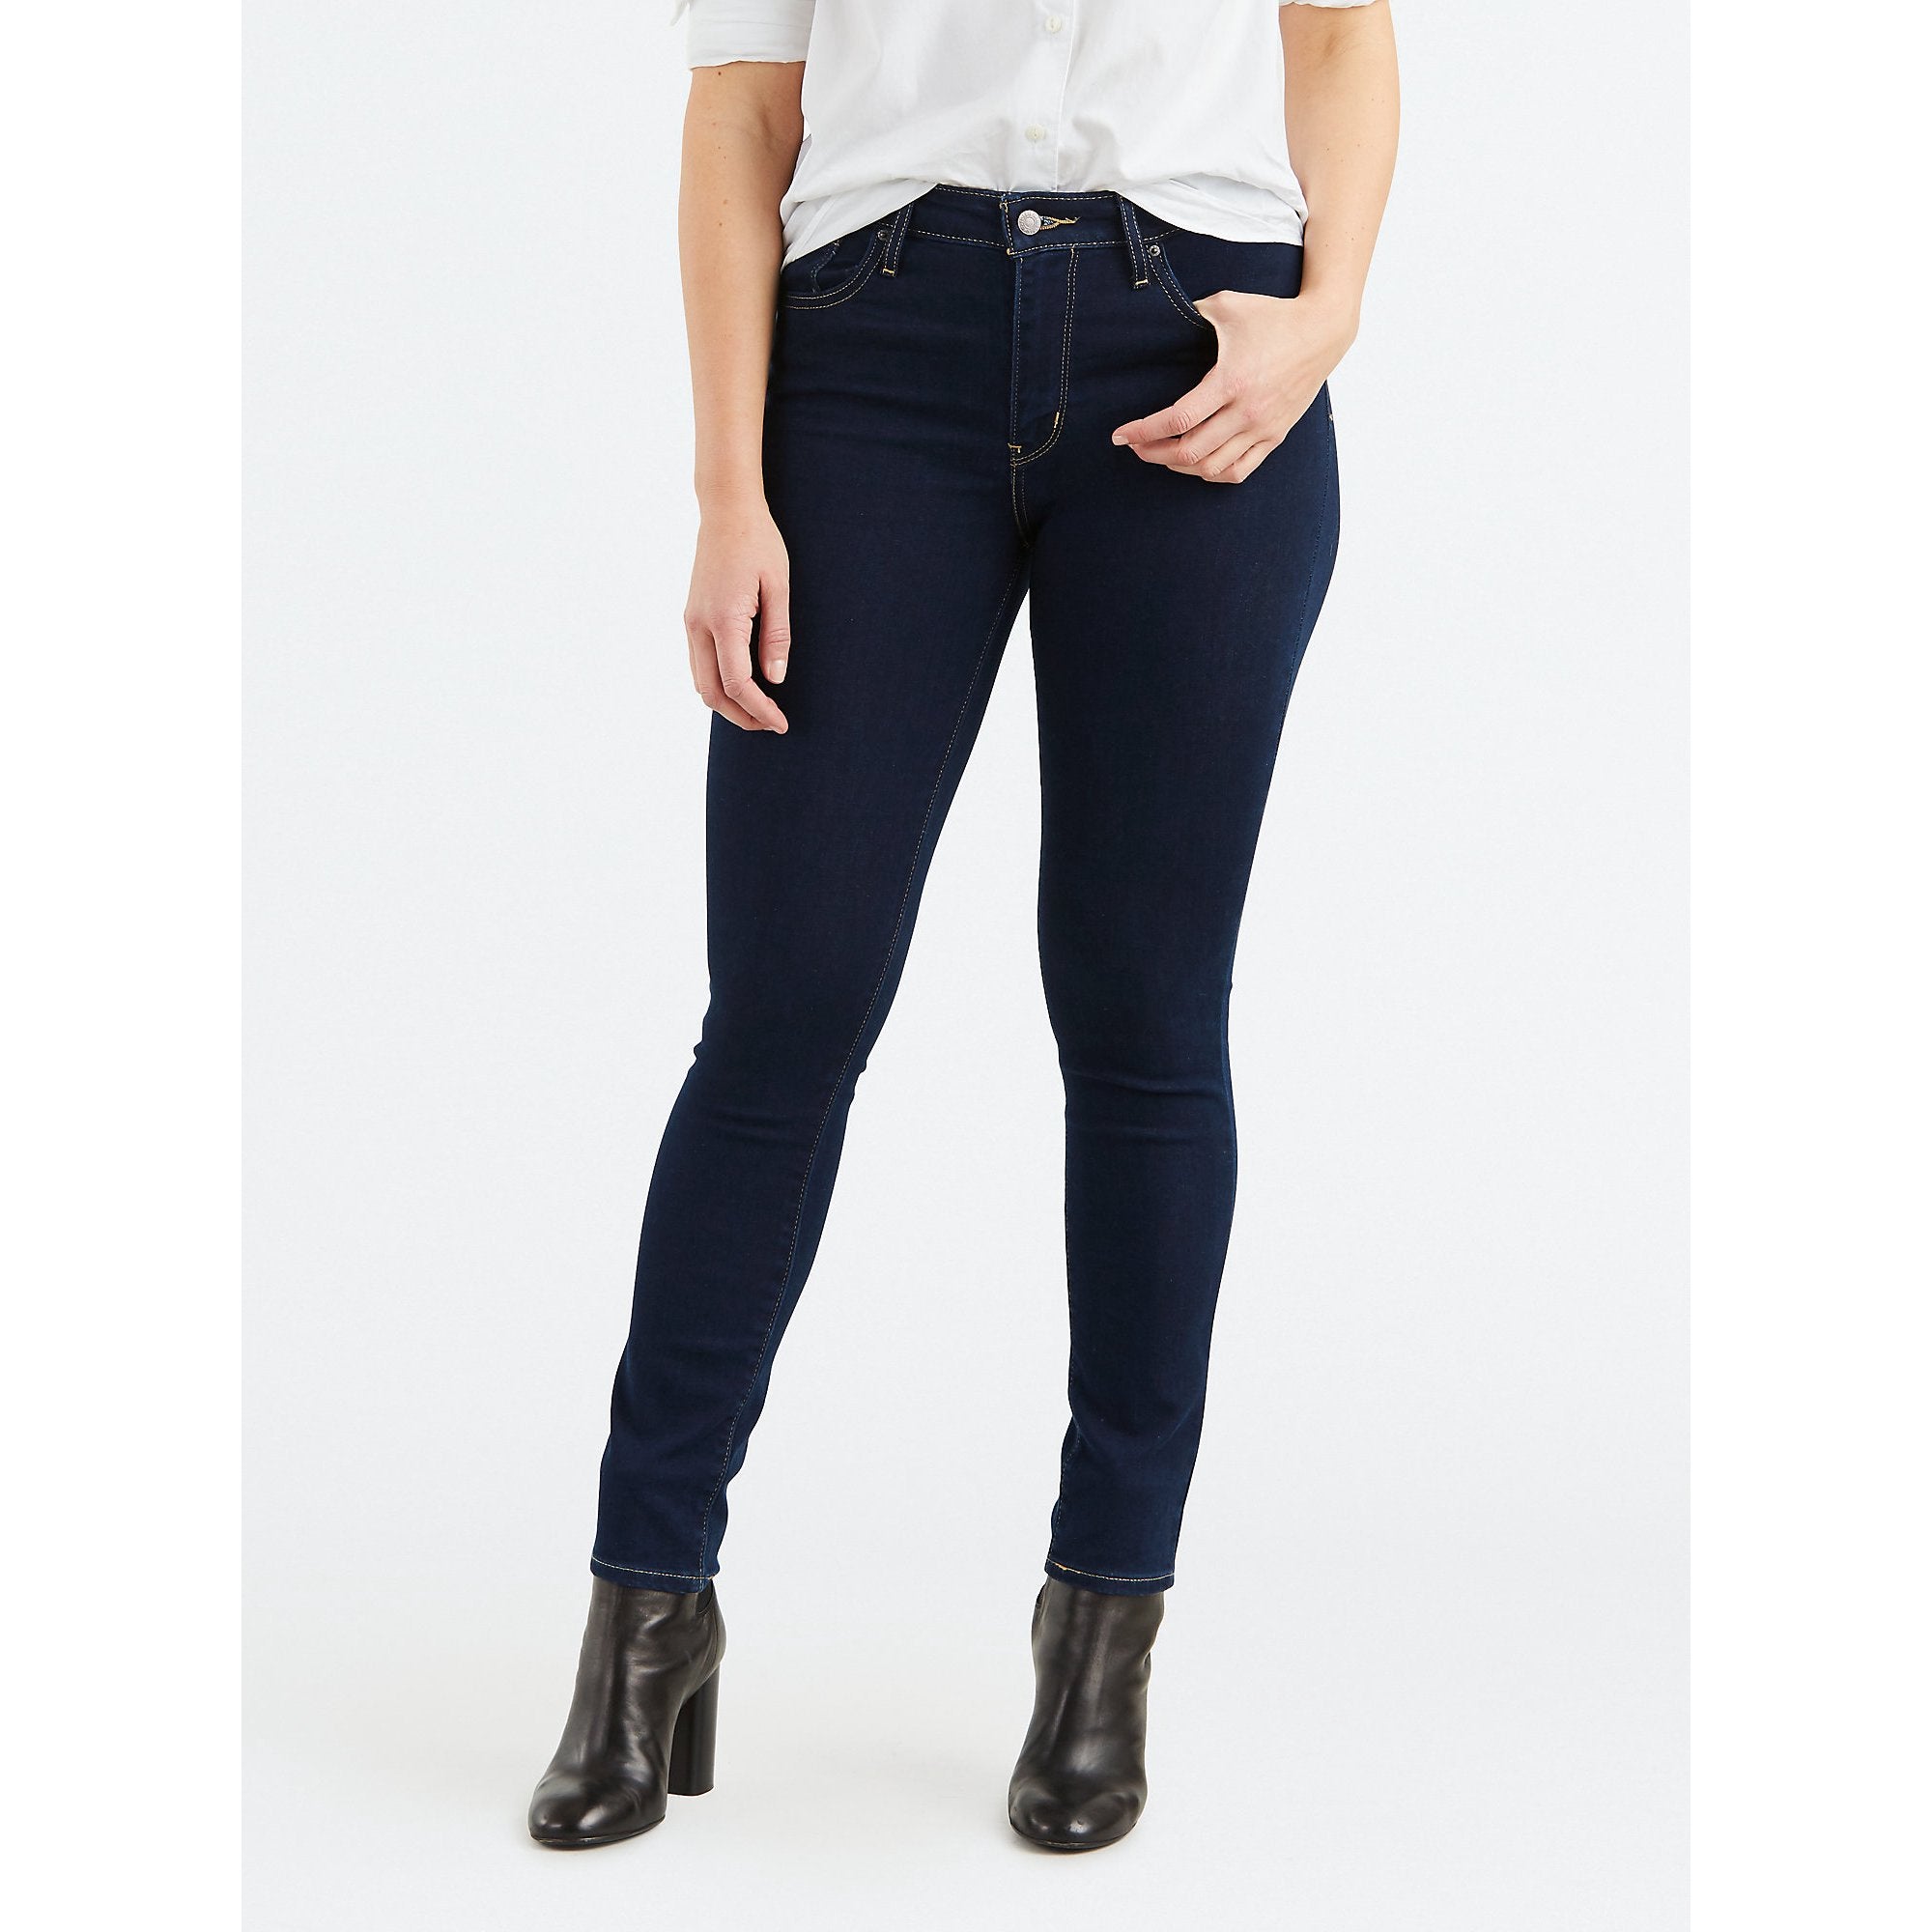 Levi’s + 721 High Rise Skinny Jeans